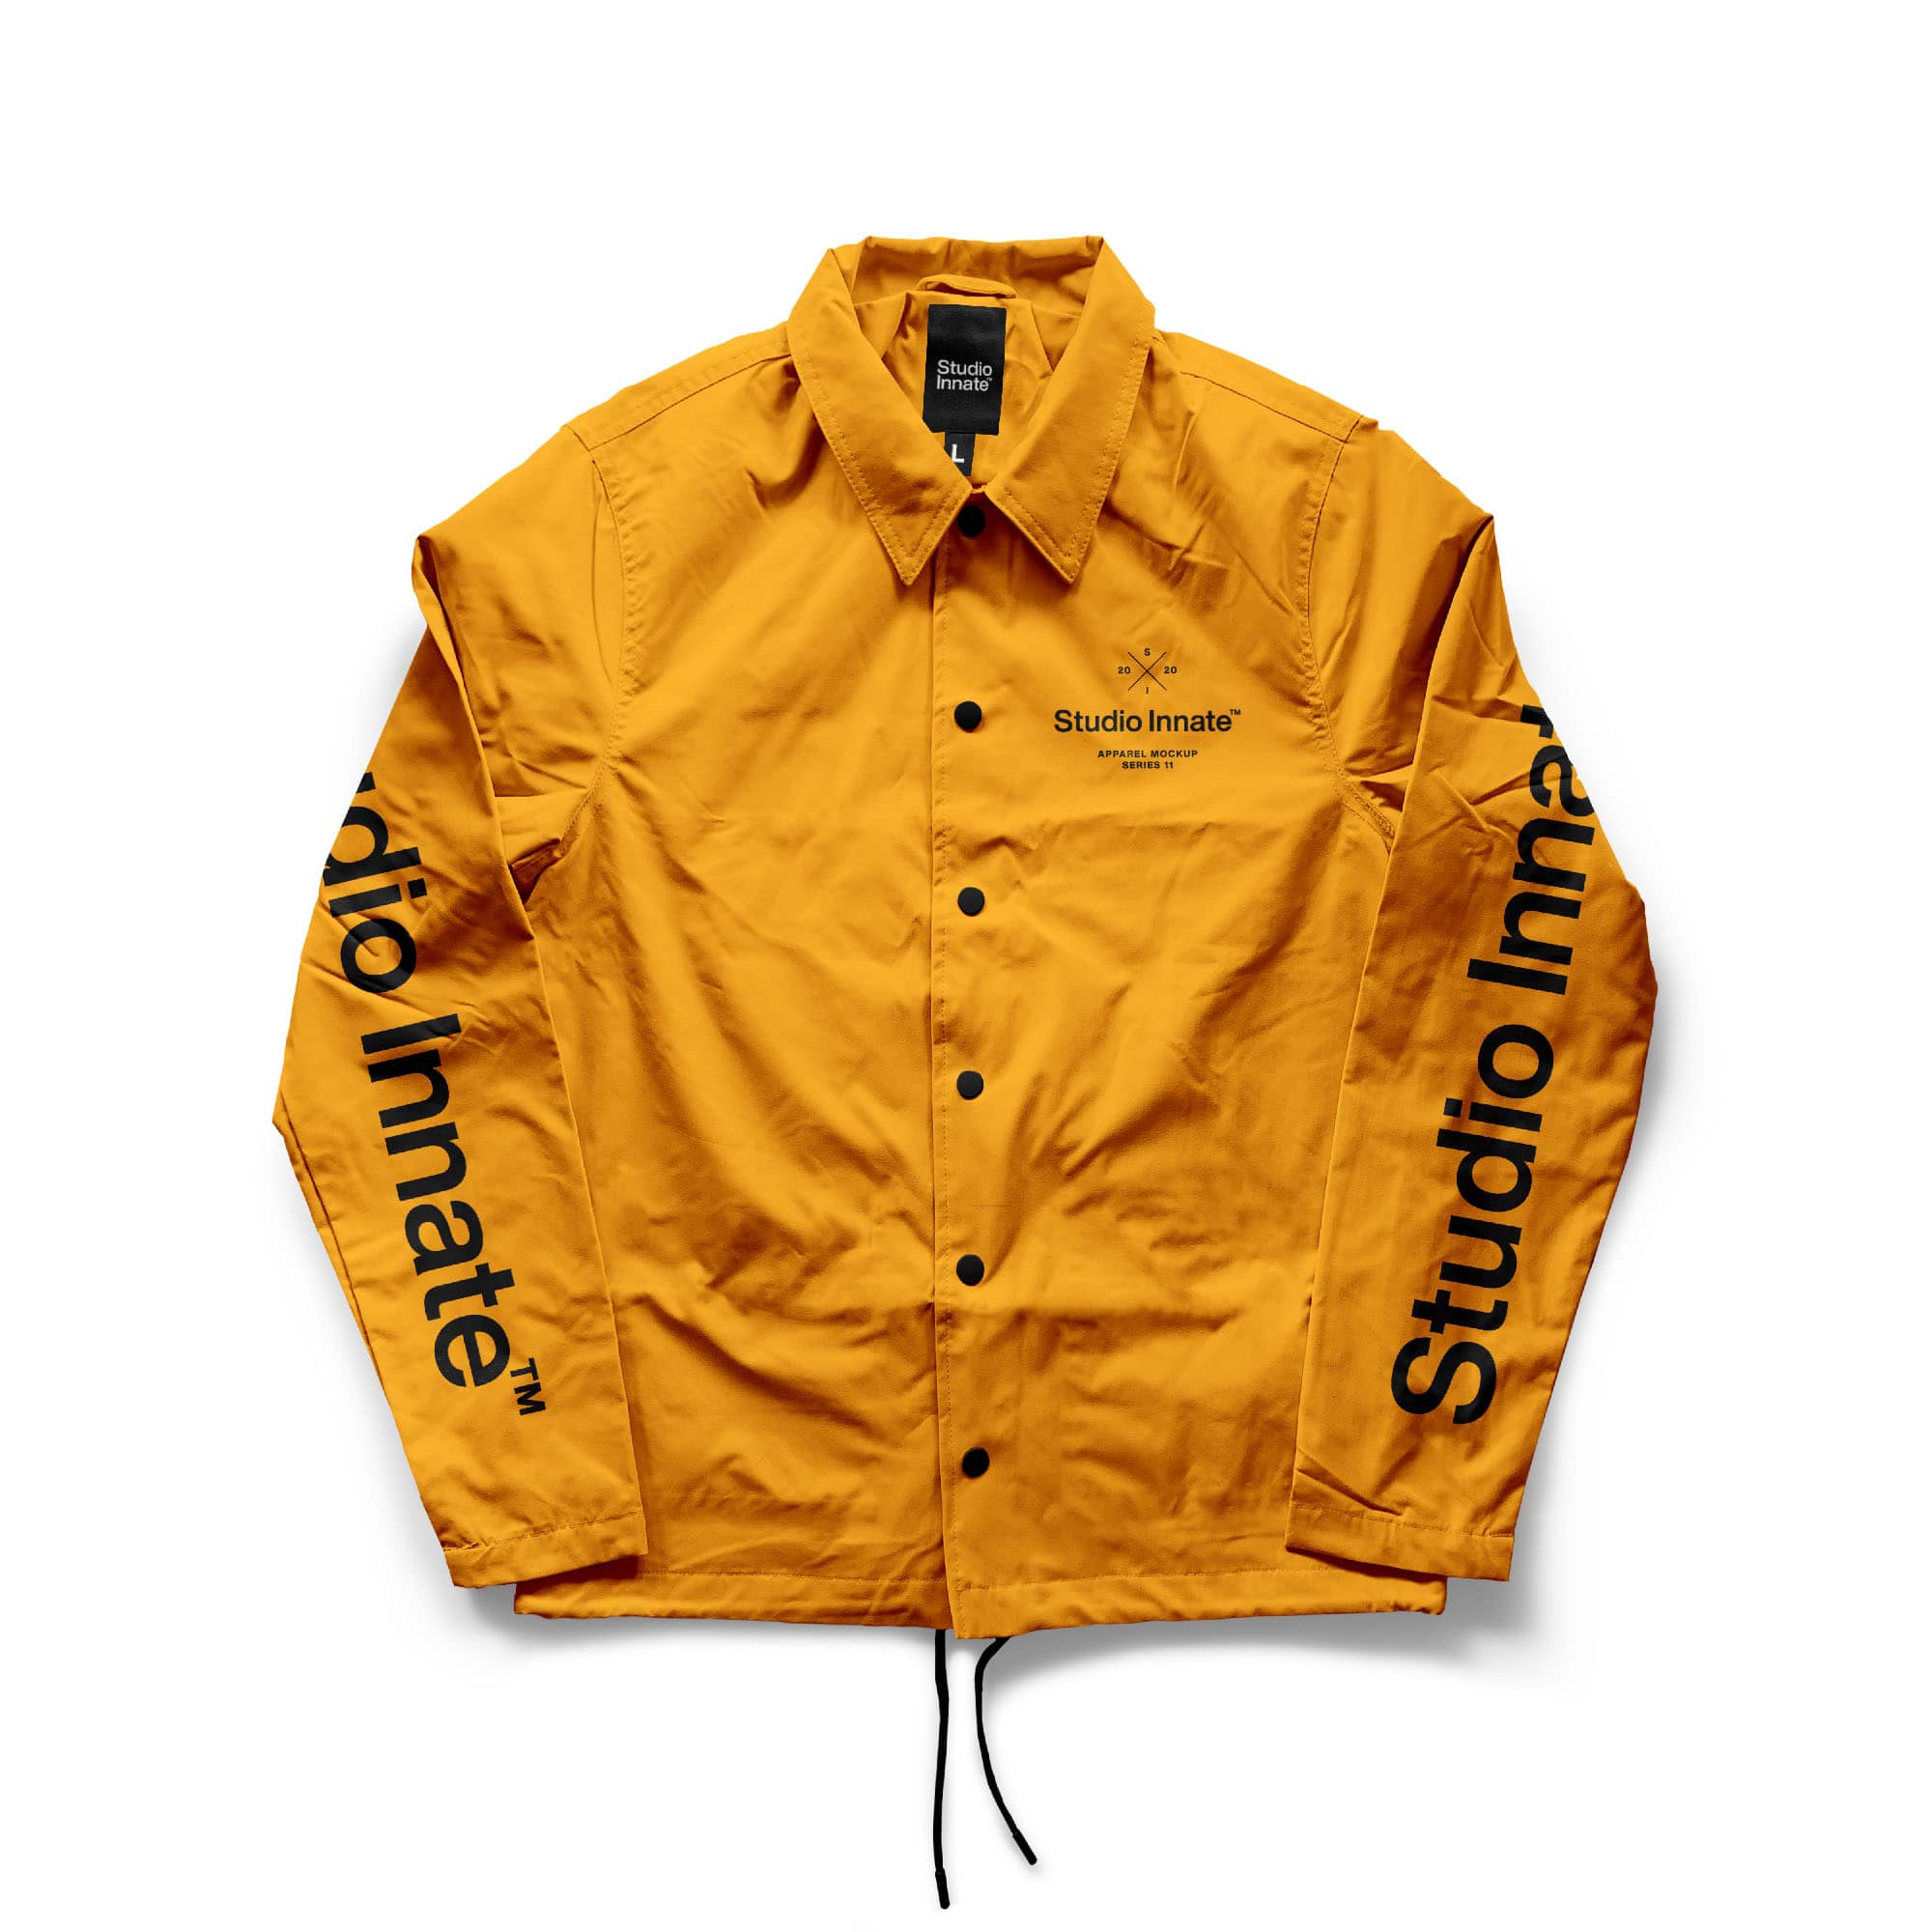 Enhance Your Design Presentations with Our Premium Coach Jacket Mockup